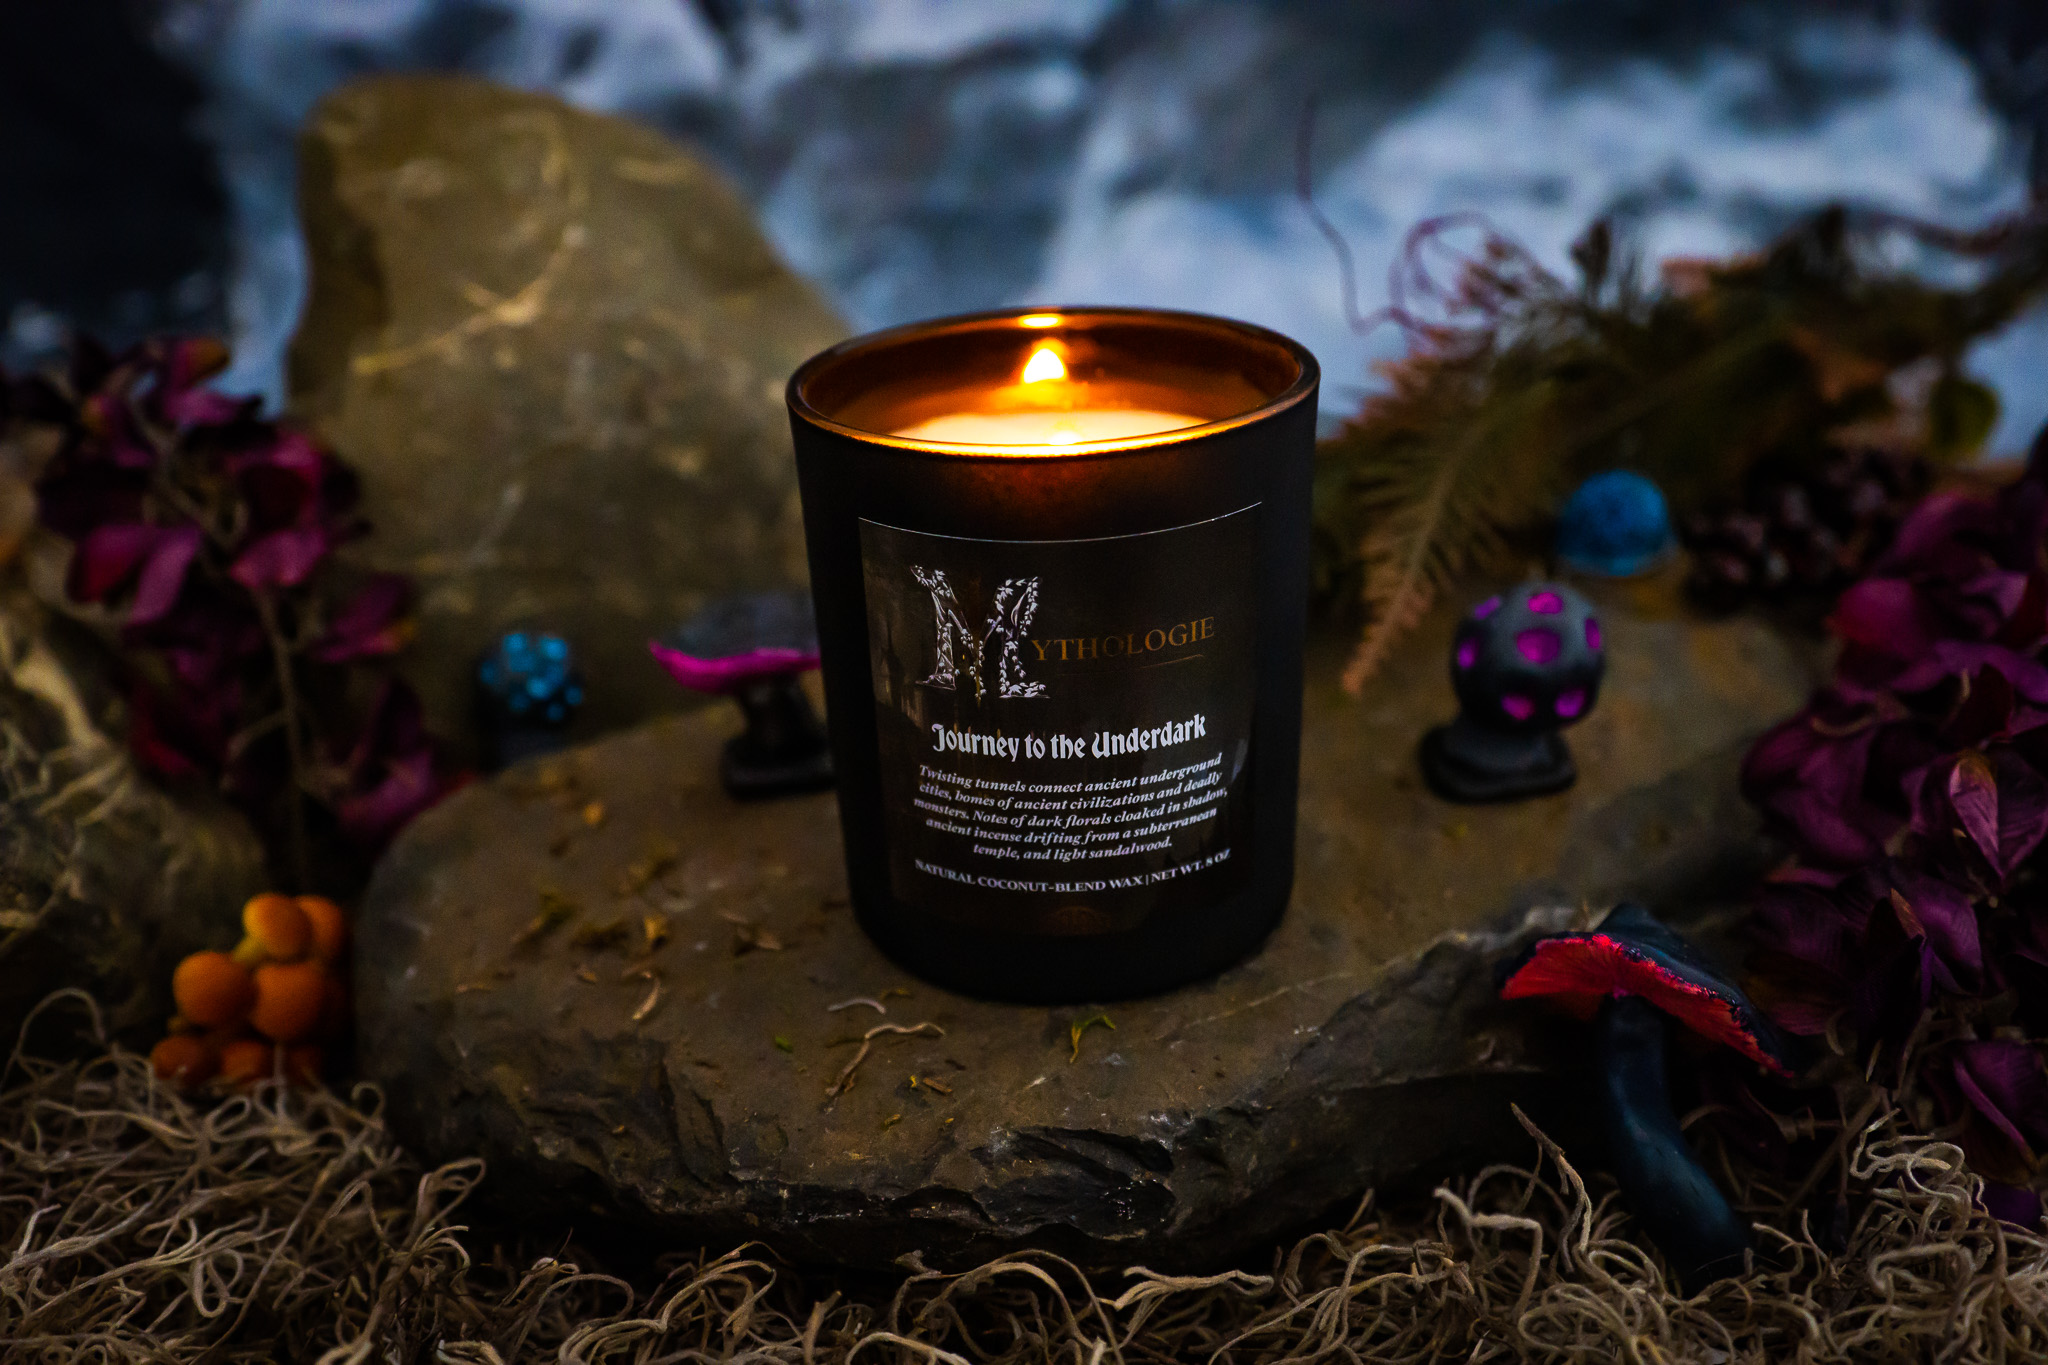 Presents a mysterious and mature aroma, blending rich sandalwood and incense with subtle floral undertones.